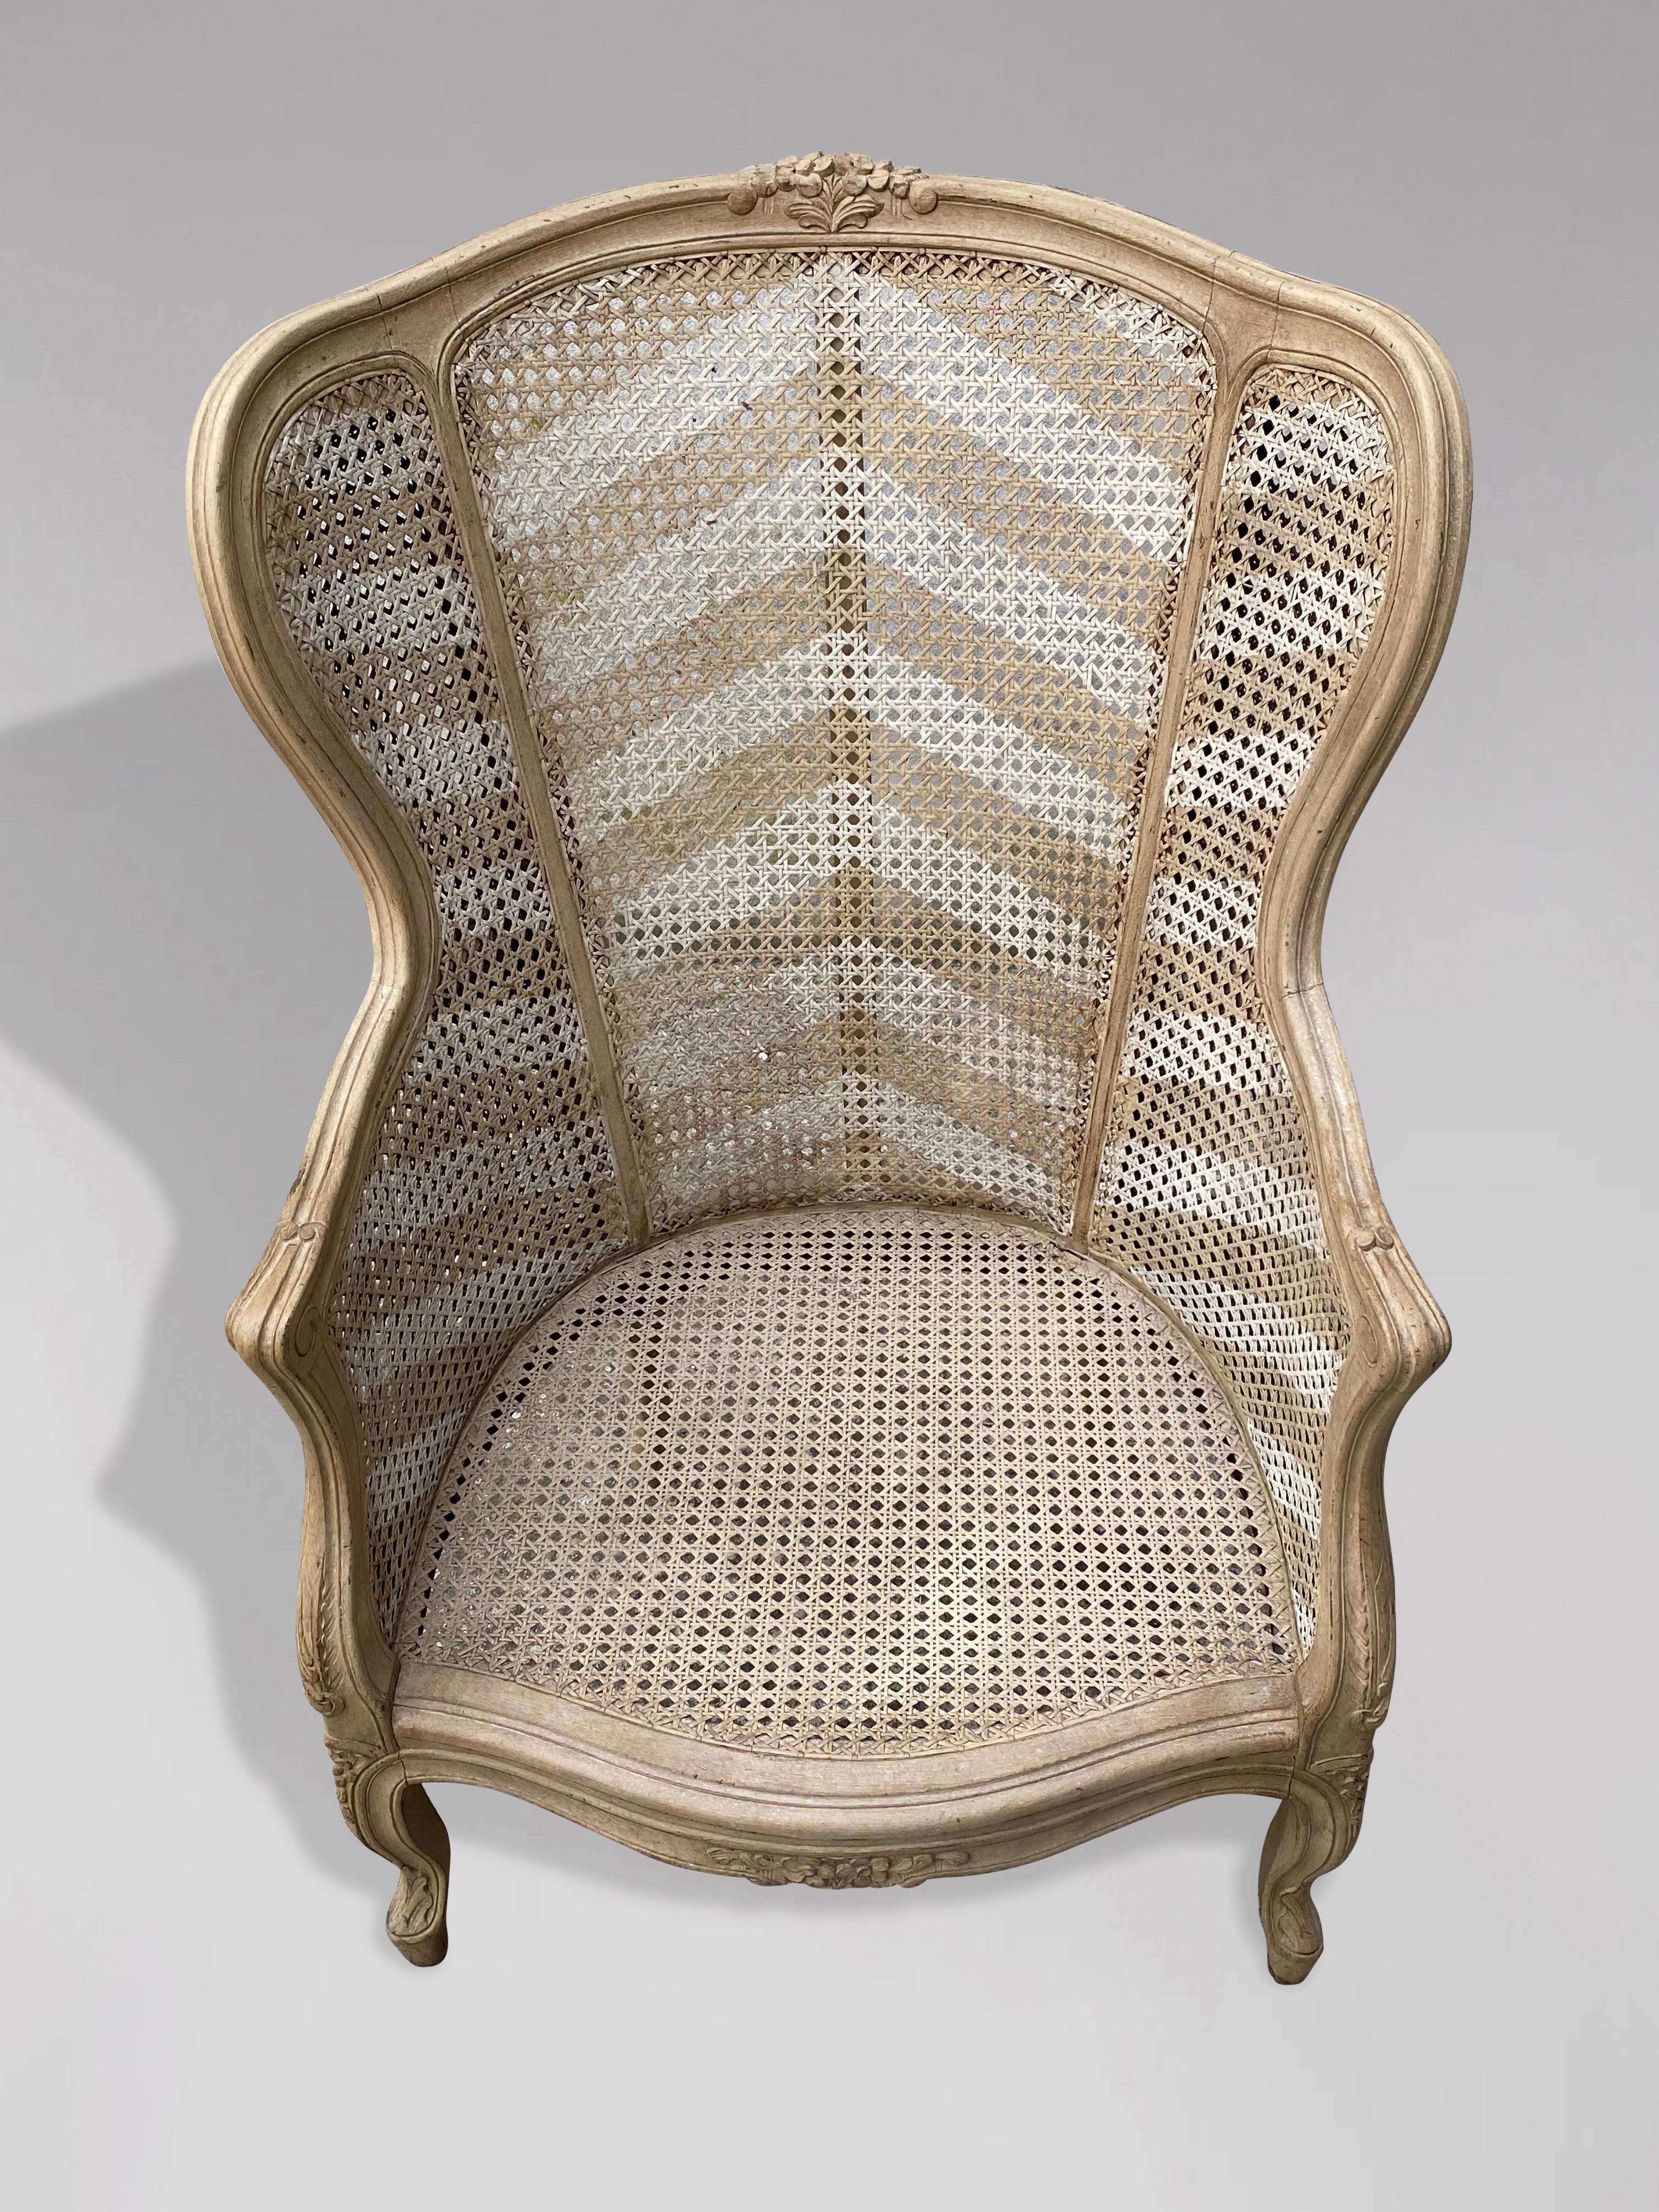 19th Century French Painted Double Caning Bergère Armchair For Sale 2